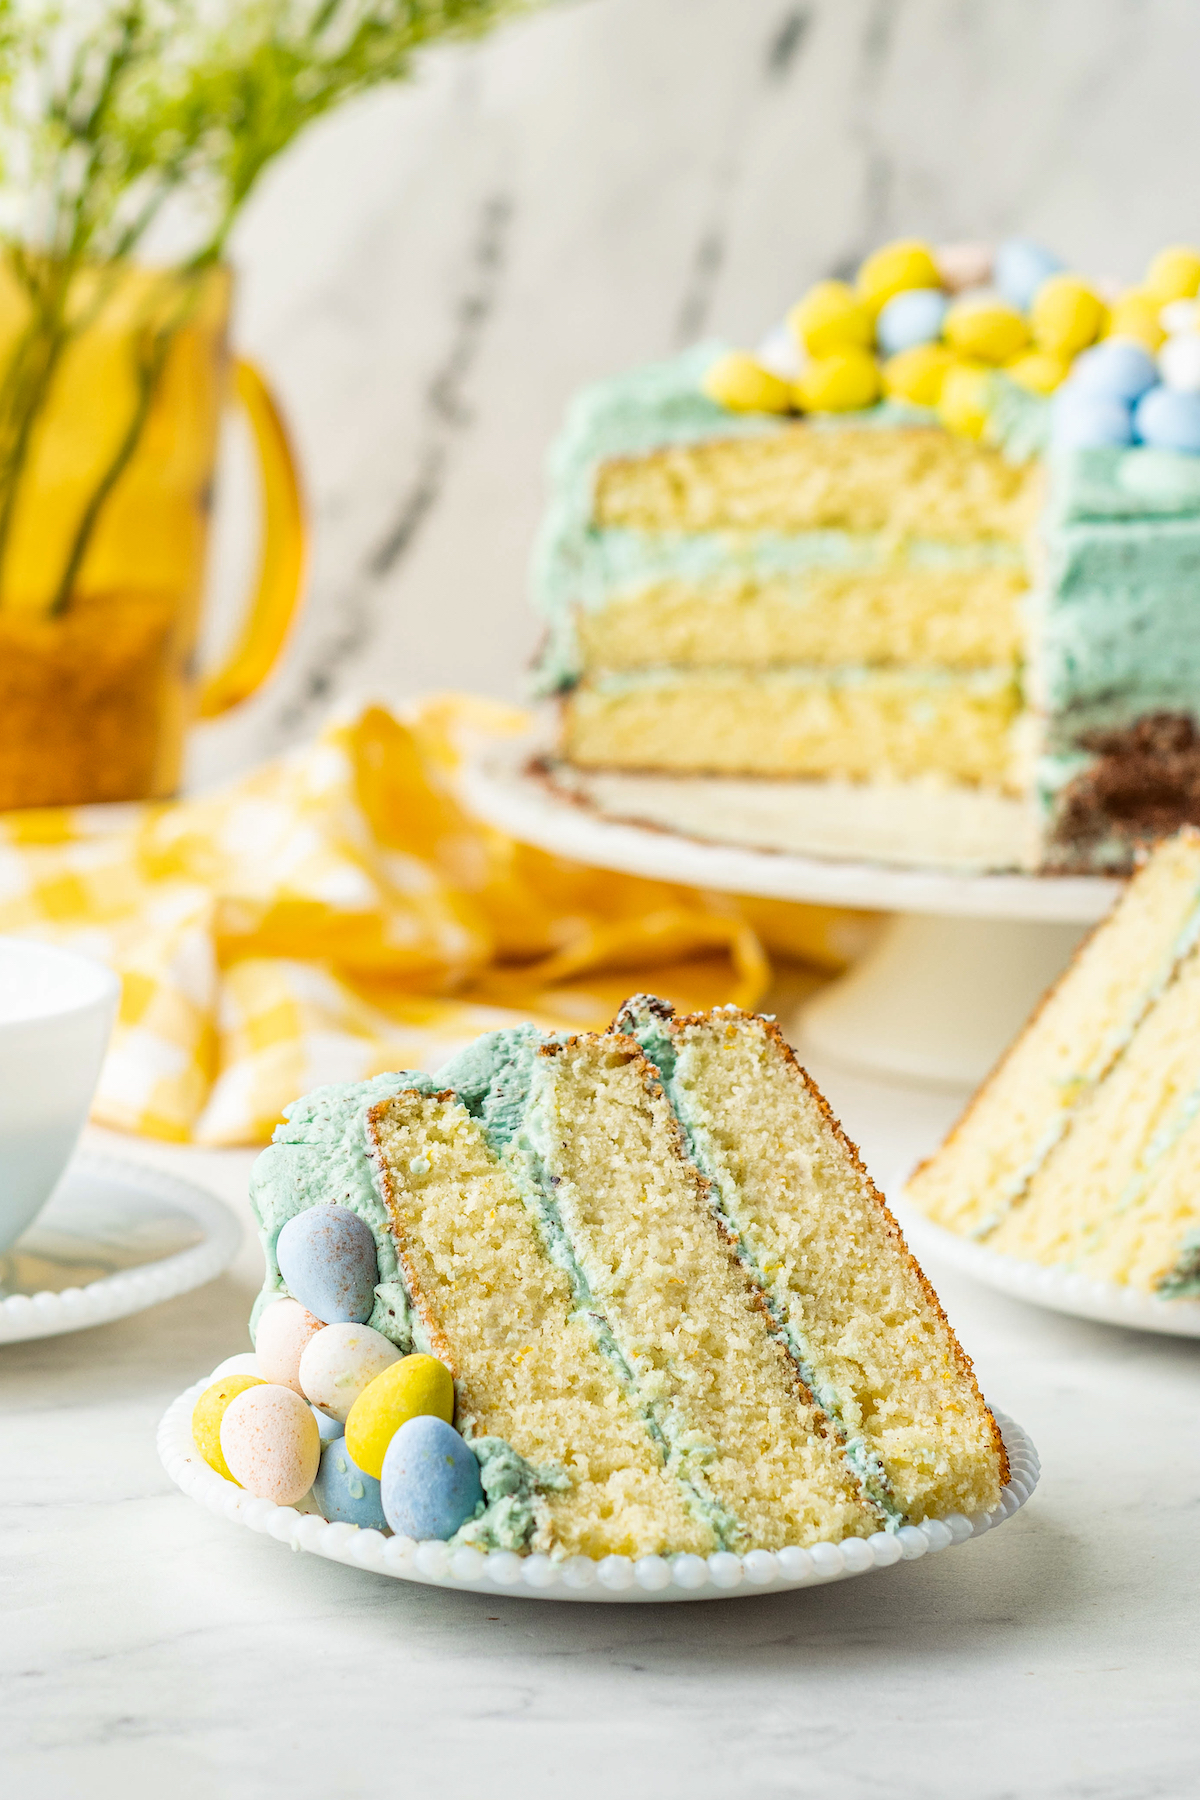 Slice of triple layer Easter cake on a plate.